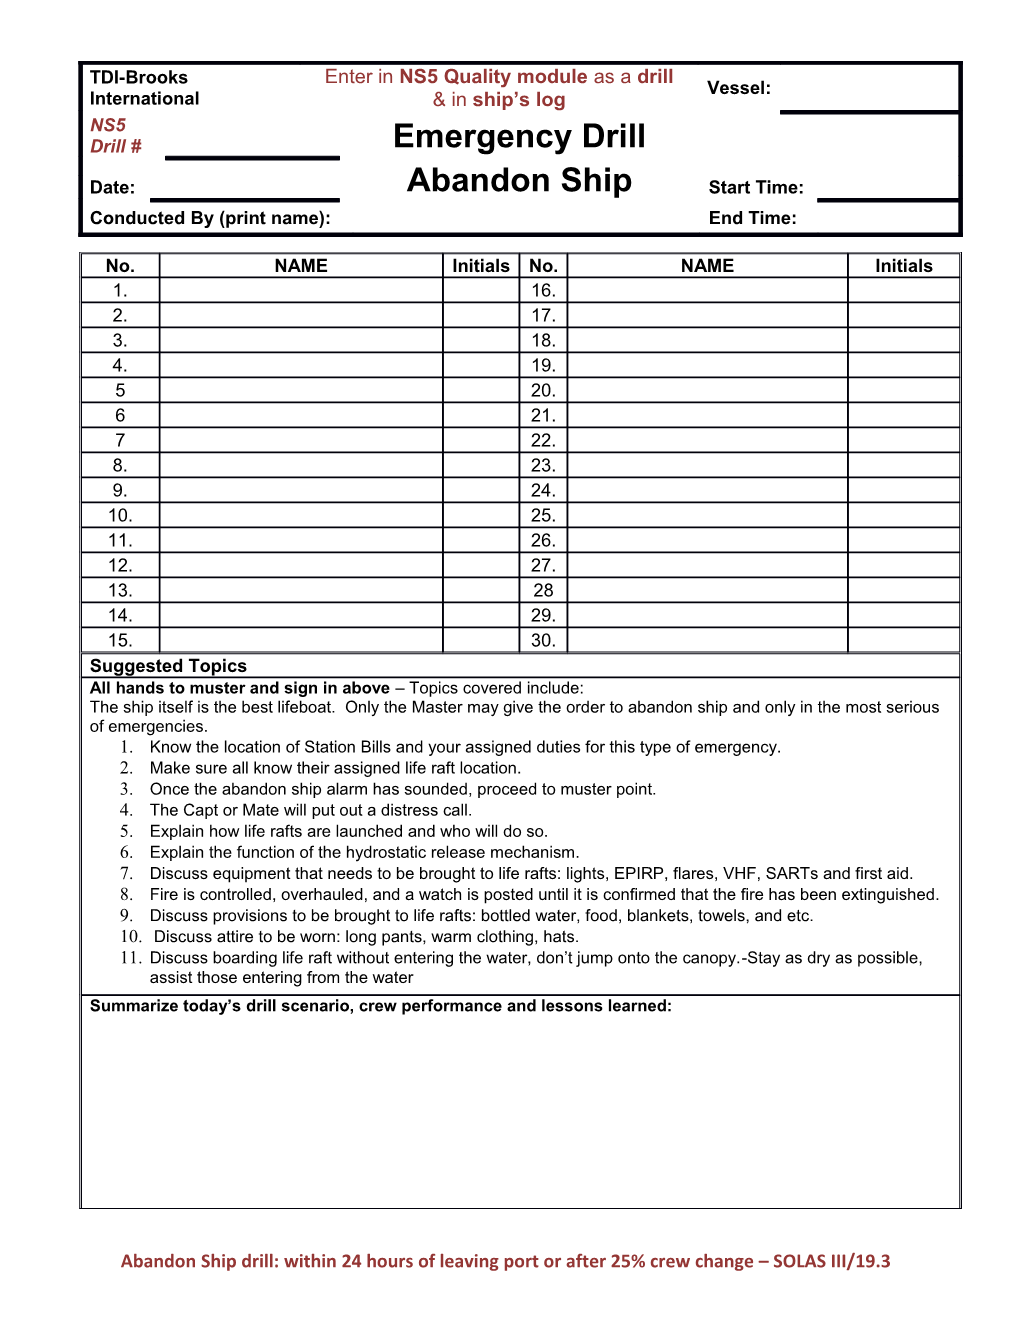 Abandon Ship Drill: Within 24 Hours of Leaving Port Or After 25% Crew Change SOLAS III/19.3